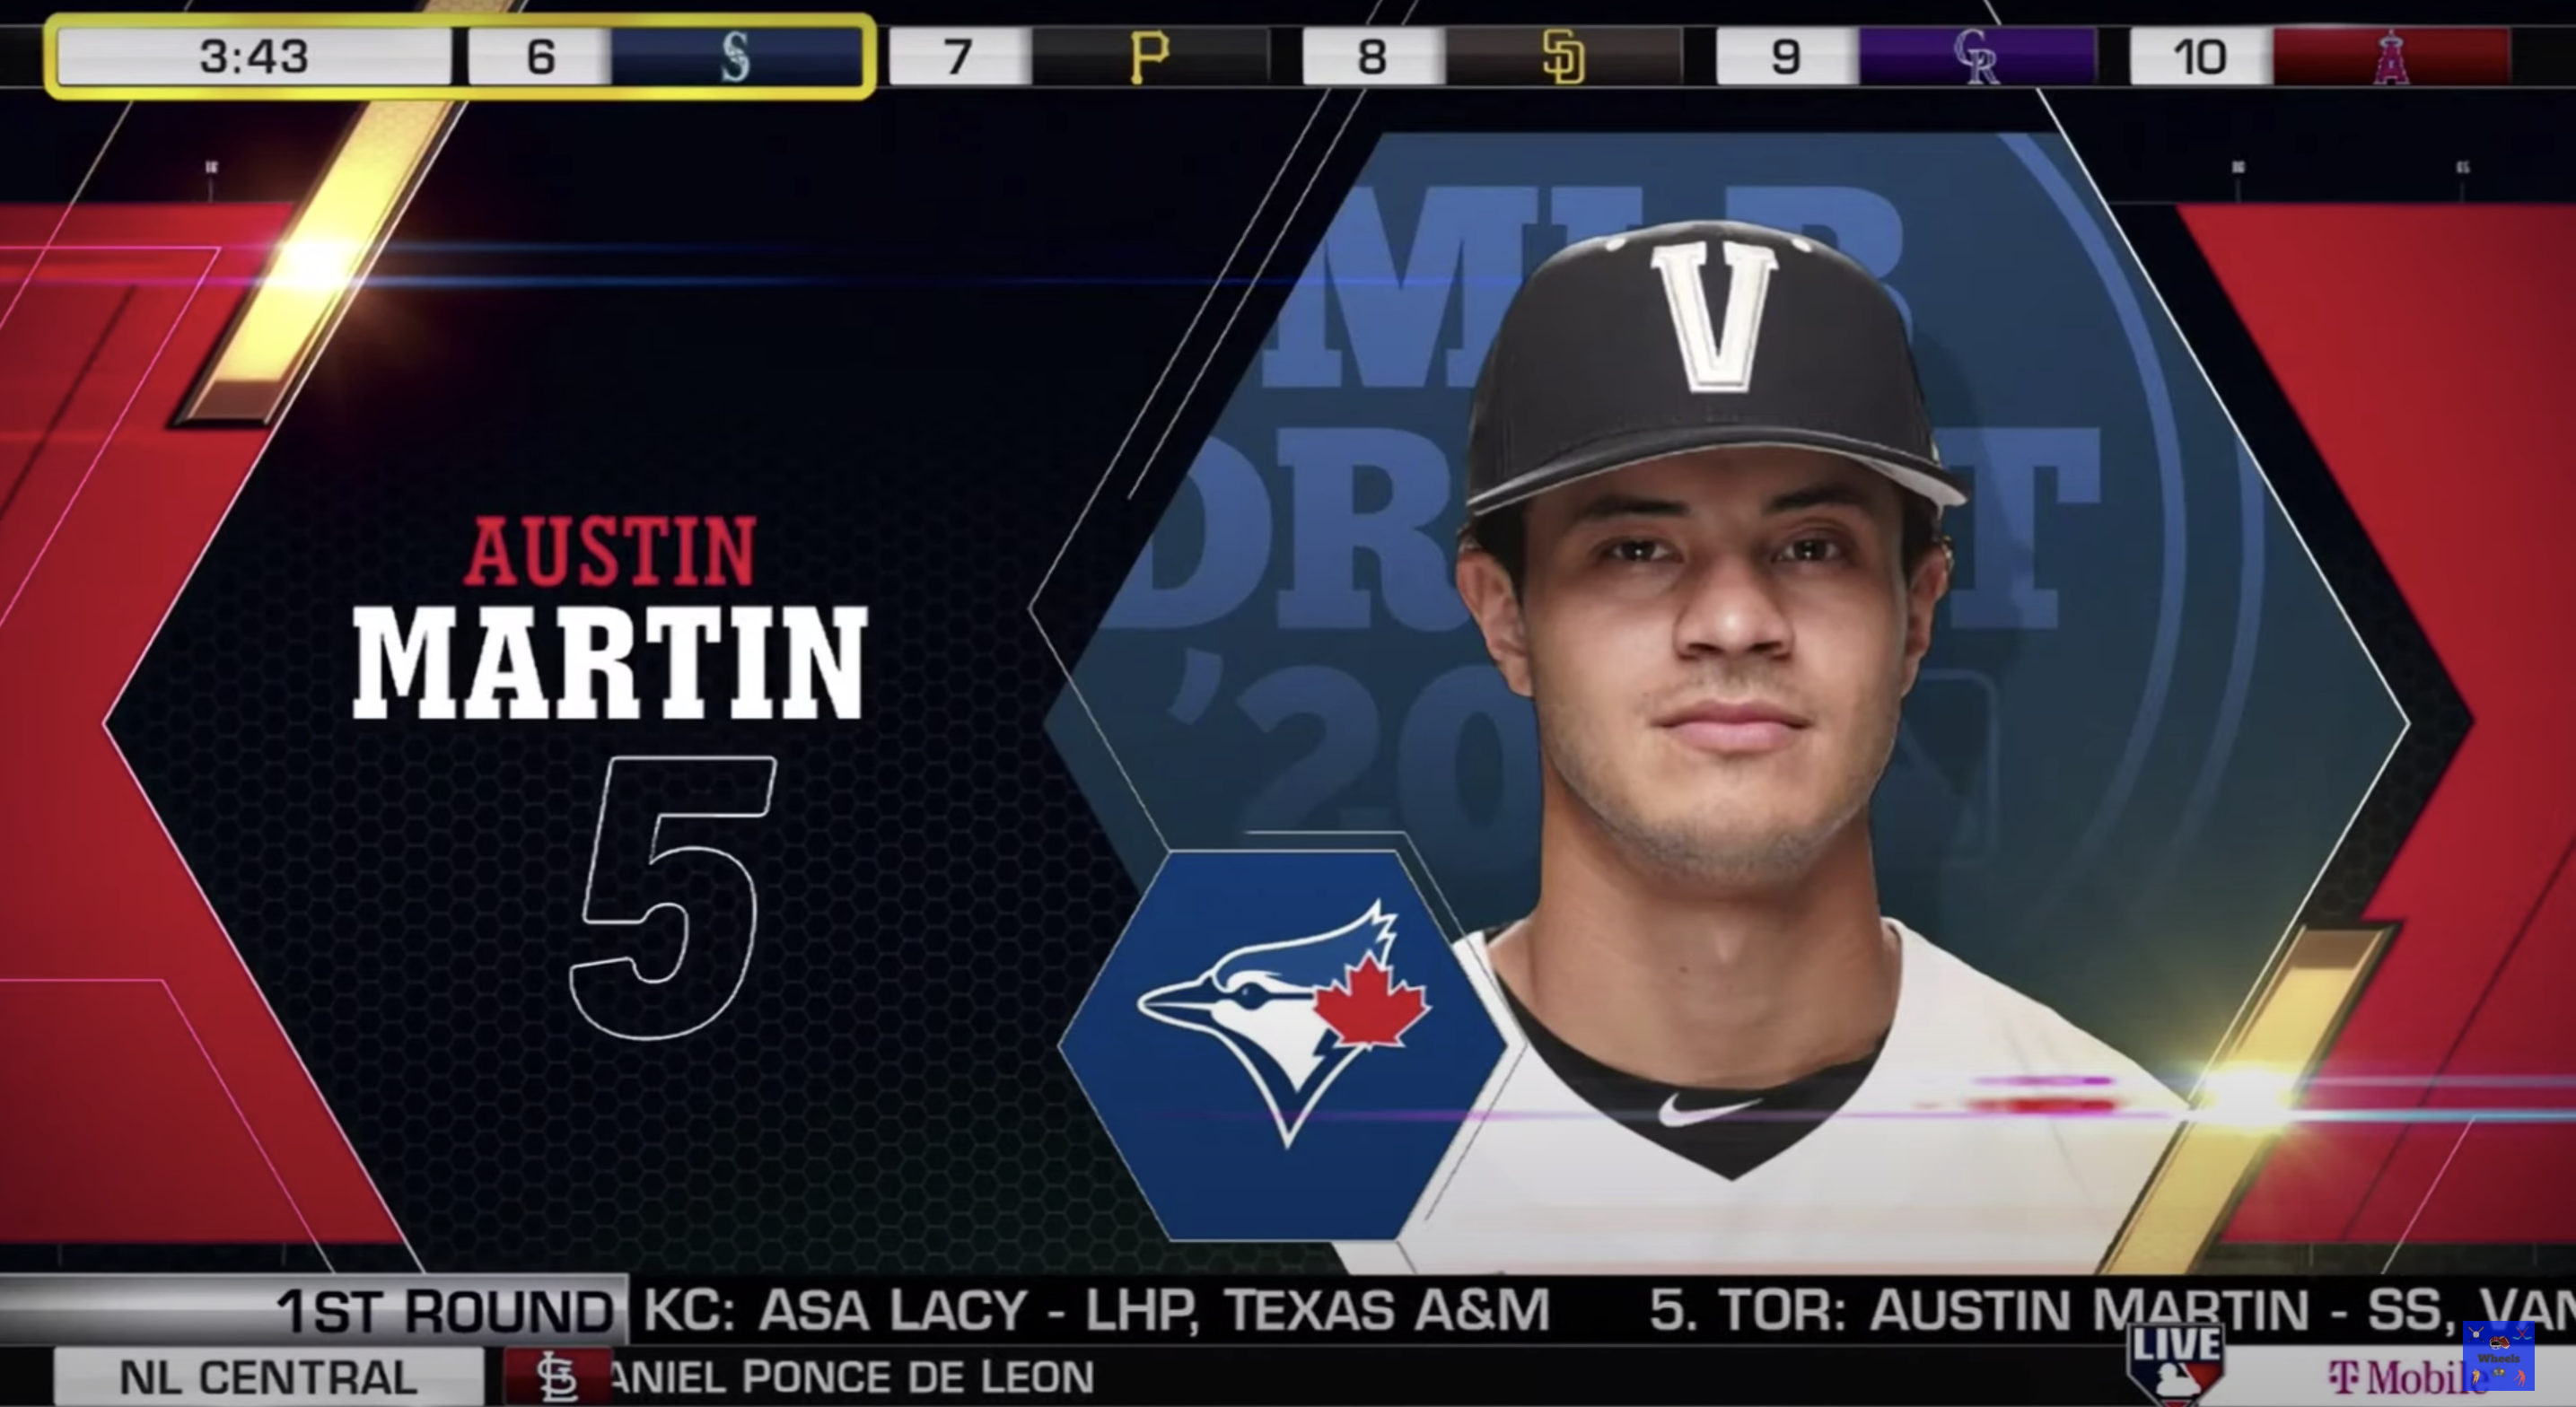 Austin Martin, Blue Jays 5th overall pick in the 2020 MLB Draft